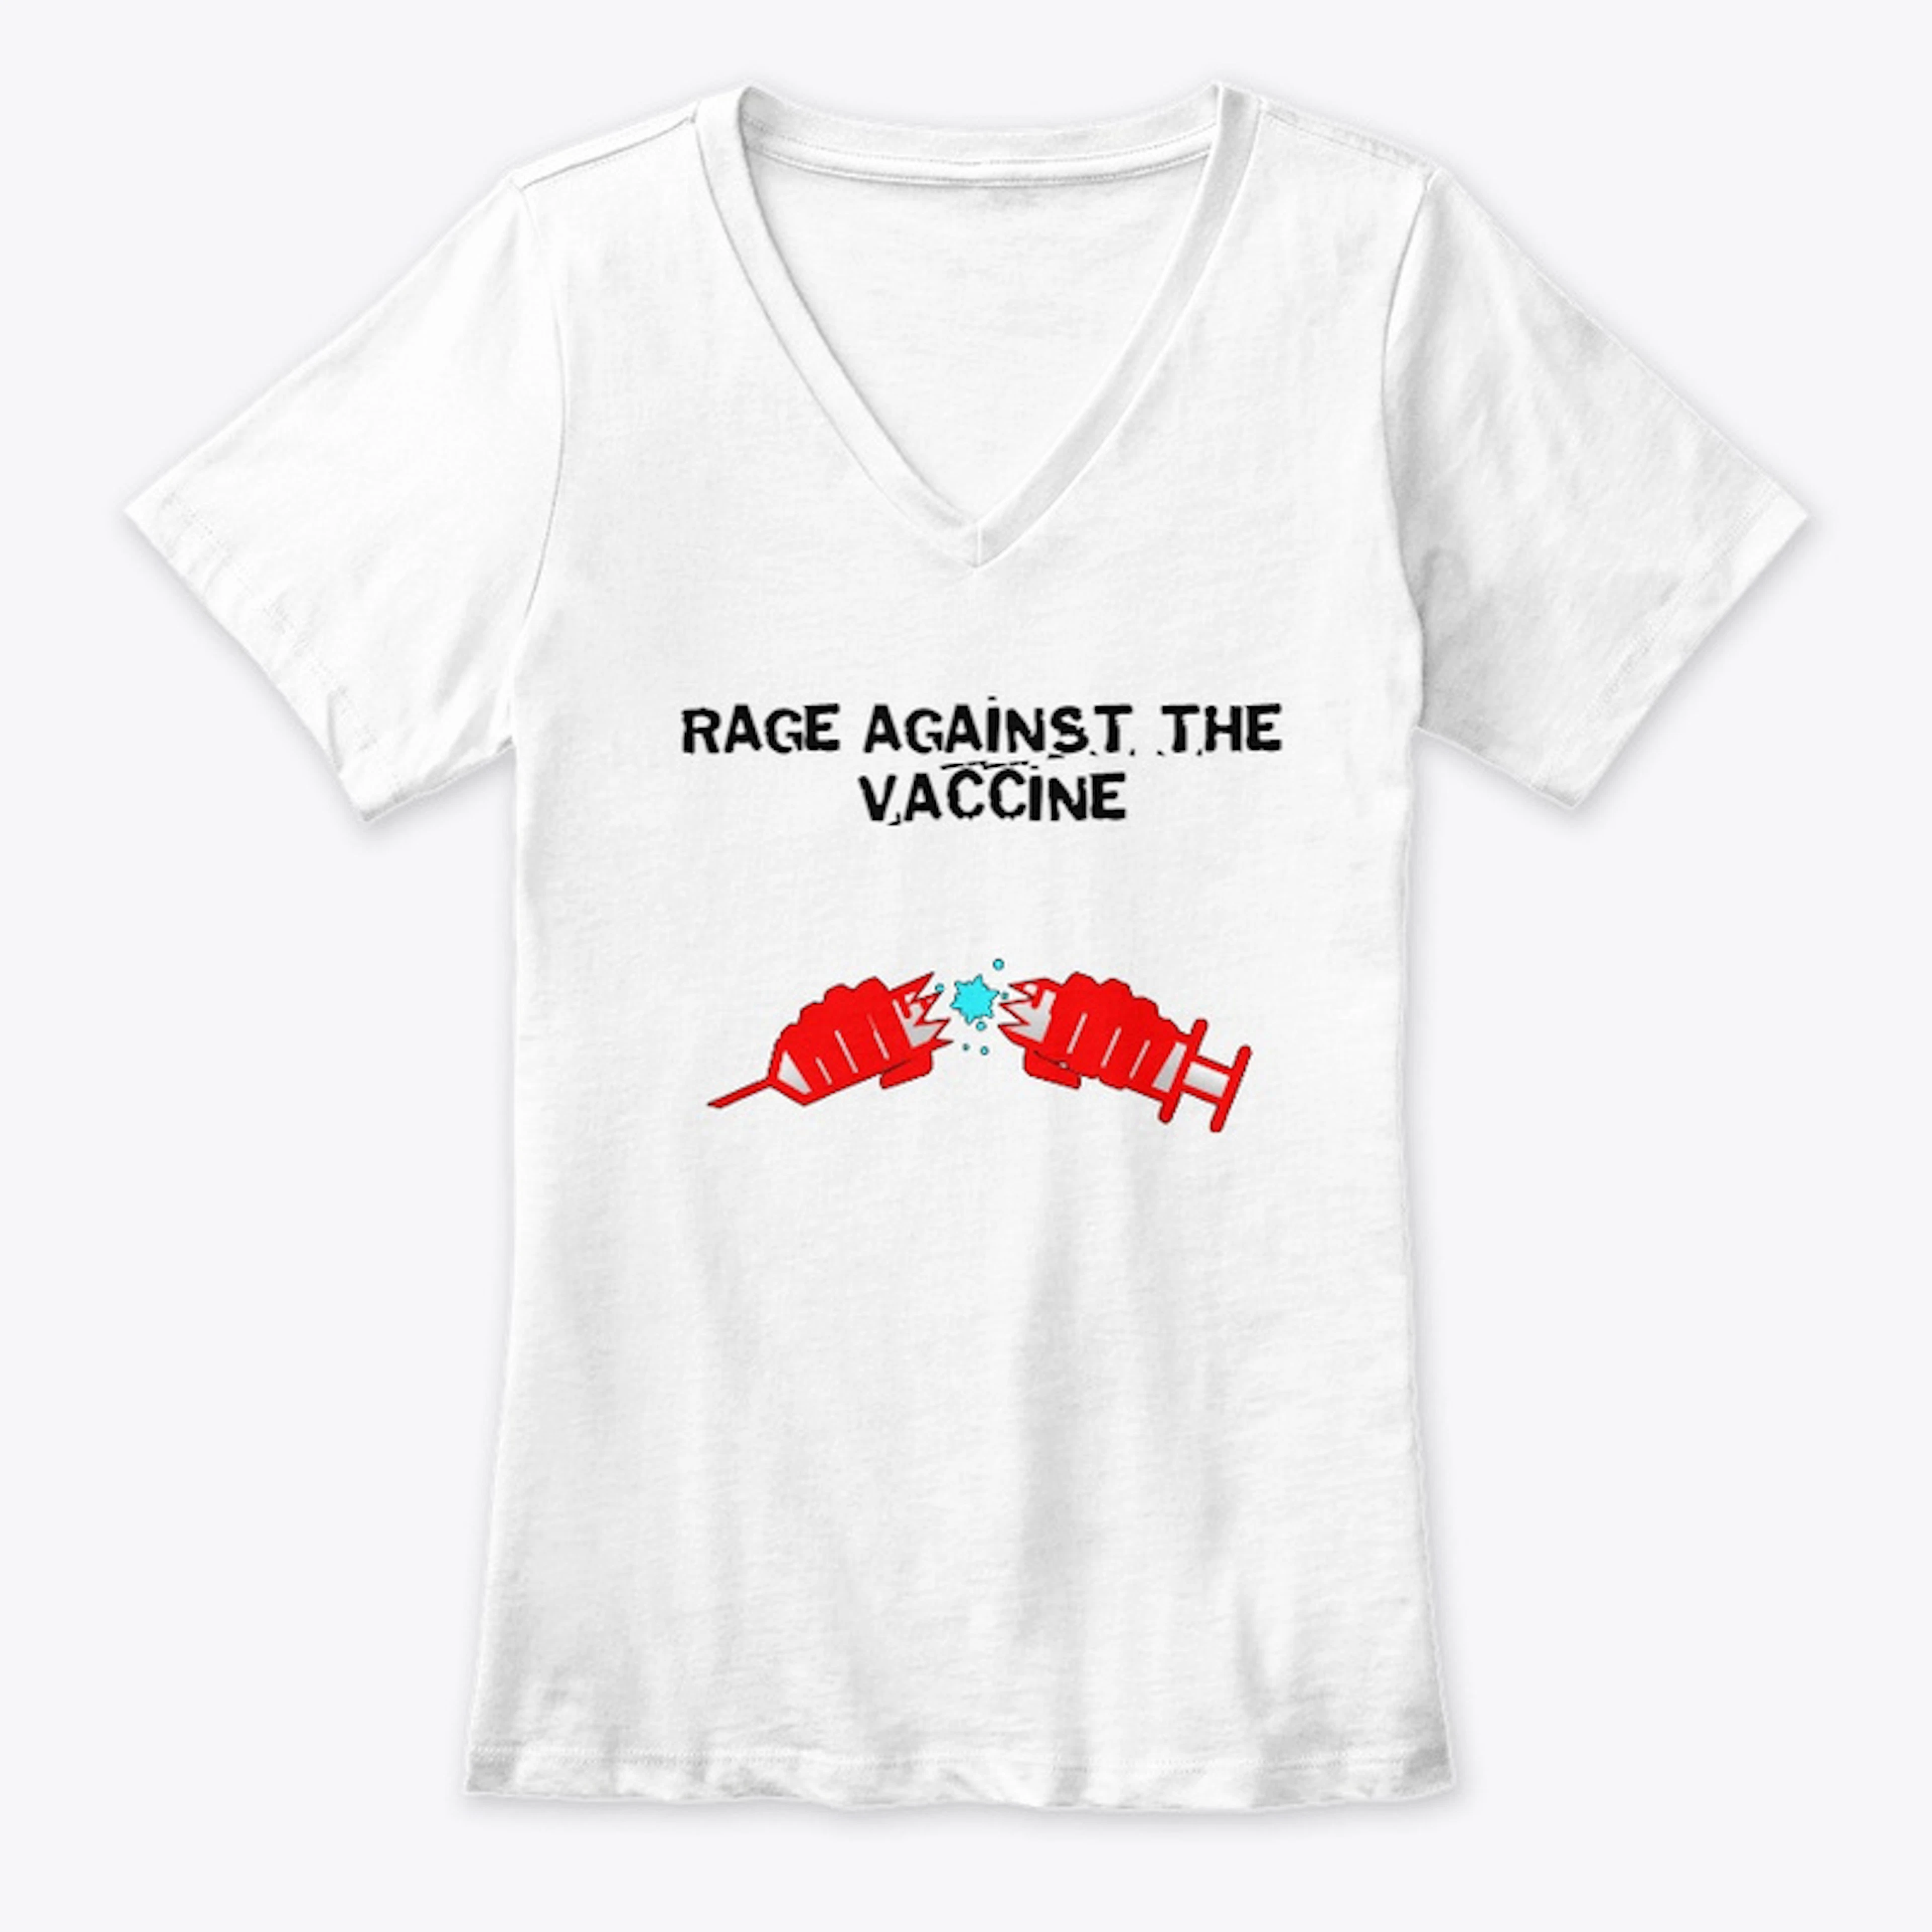 RAGE AGAINST THE VACCINE (Bordered)